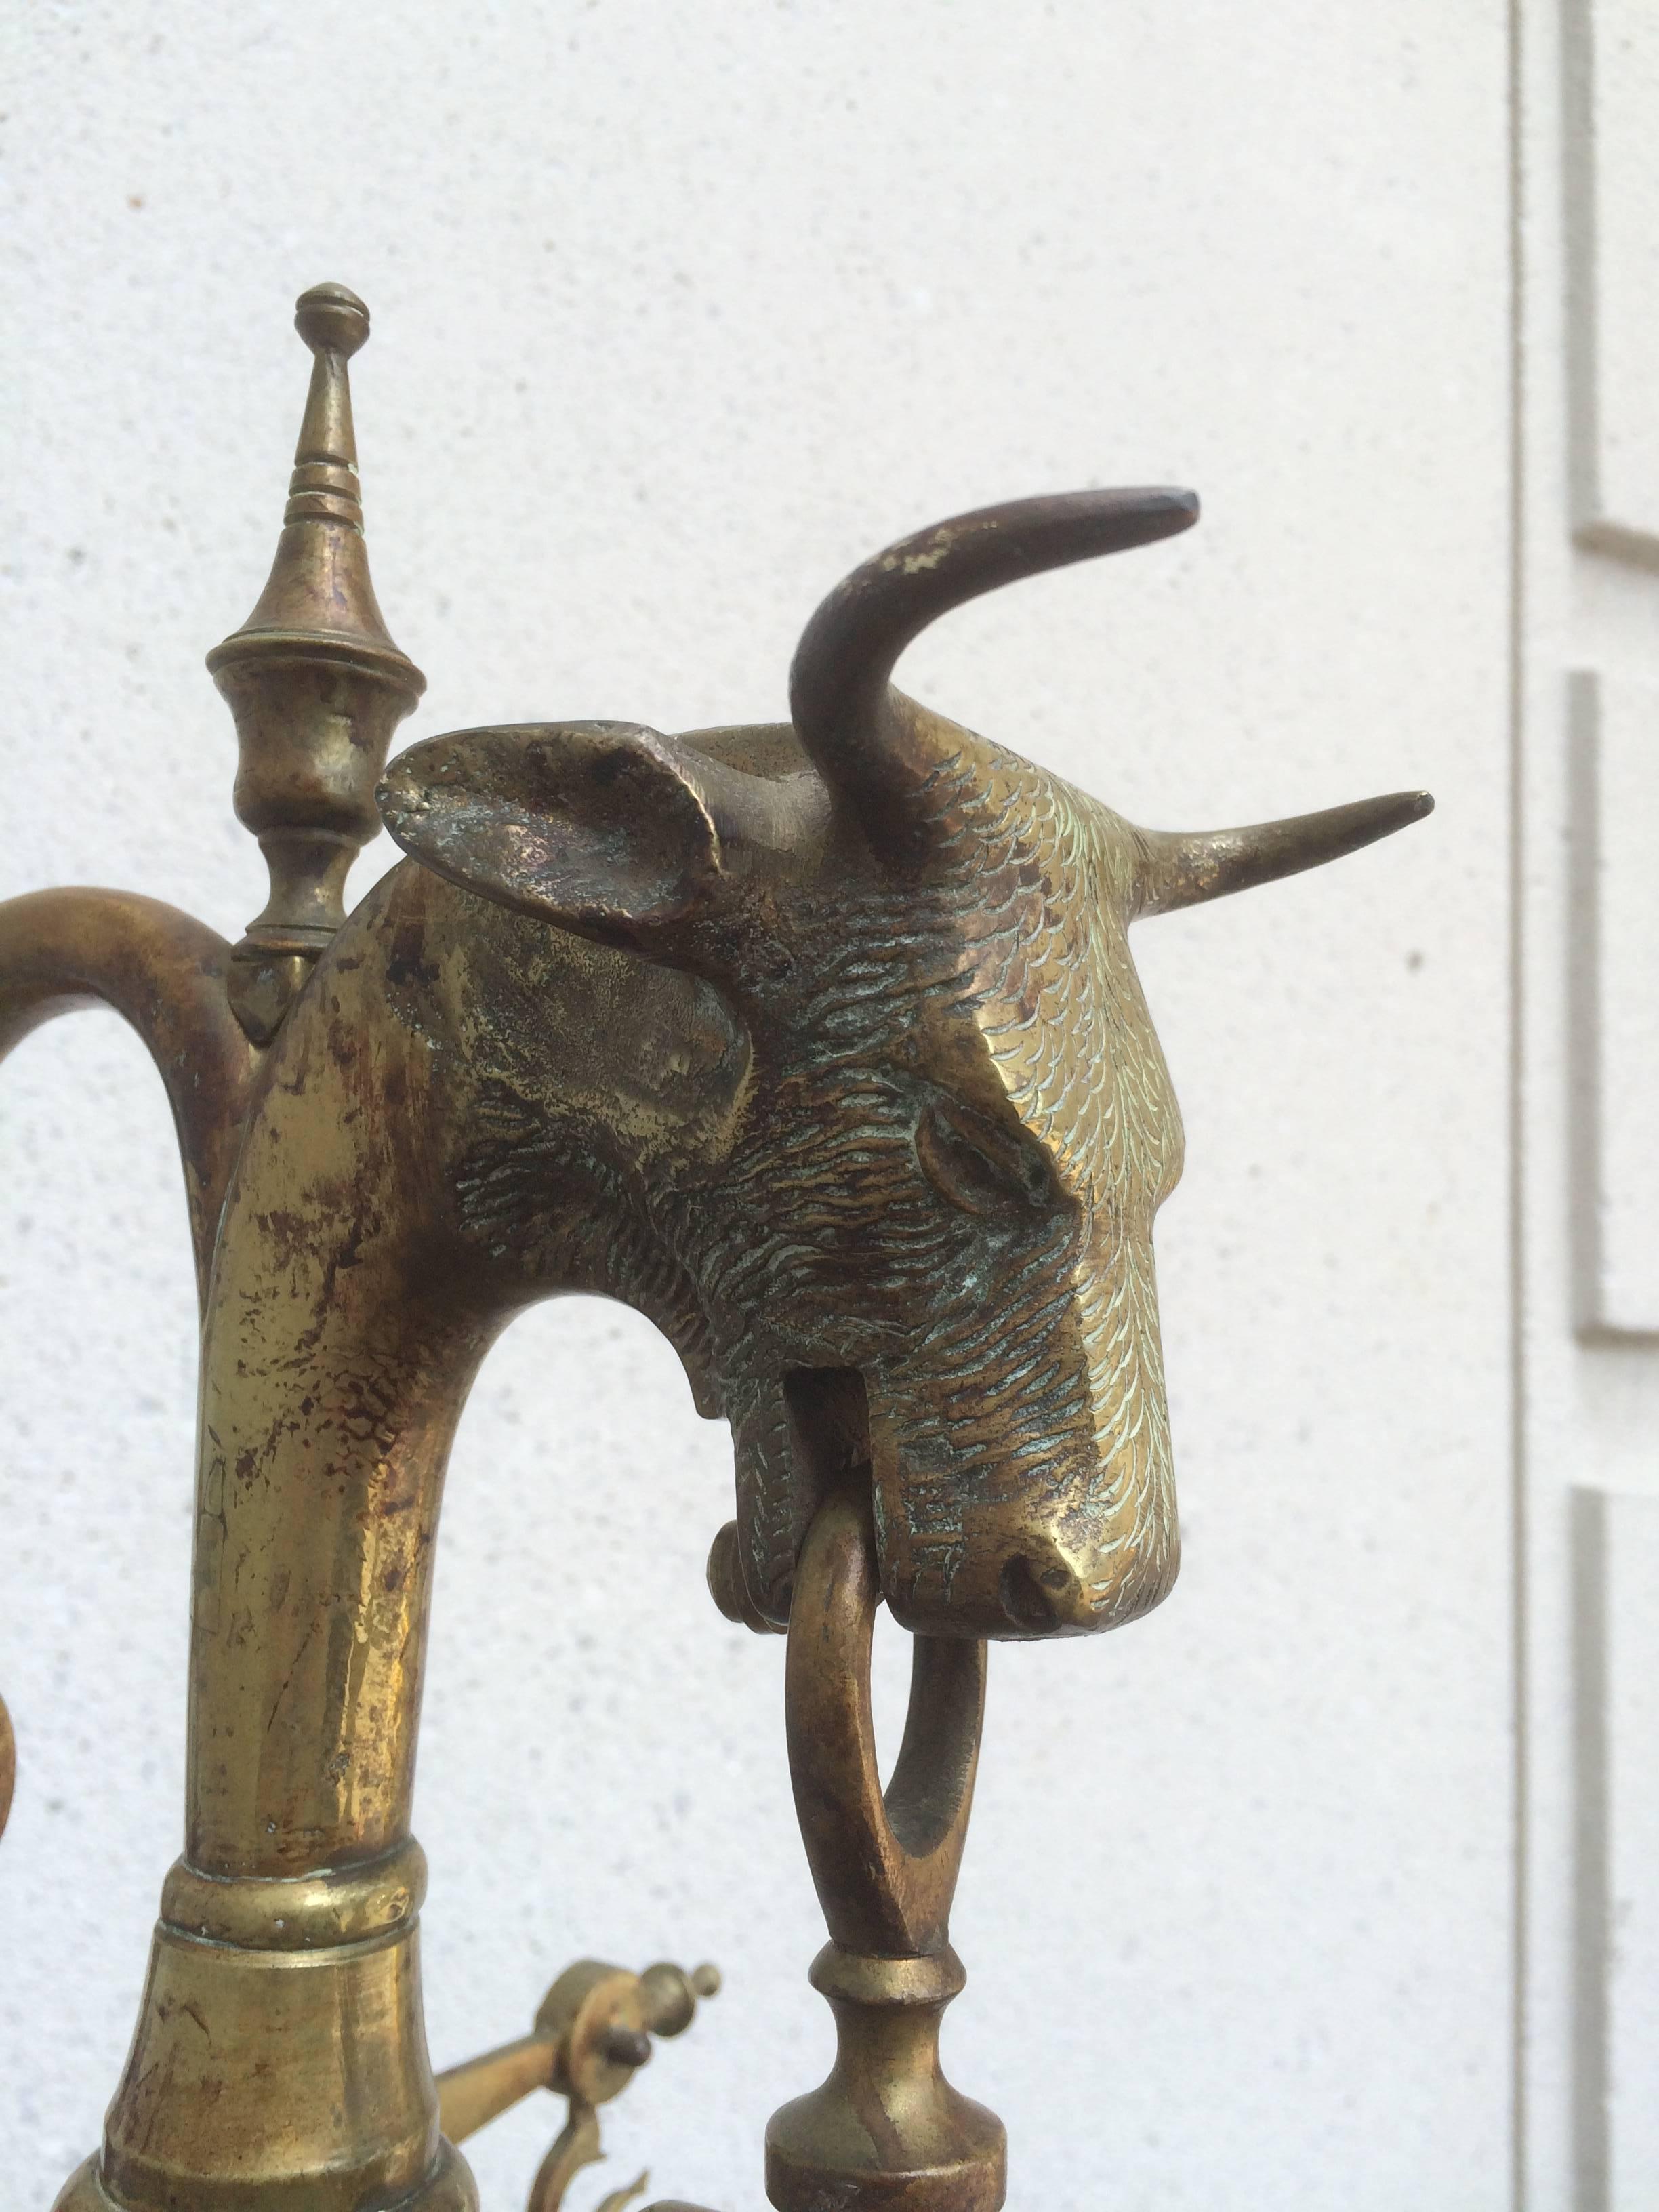 Impressive large brass balance beam scale with wonderful decorative bull's head on top and the hooks holding the scales in the form of dolphins. With original weights set into the base. 
Over five feet tall!